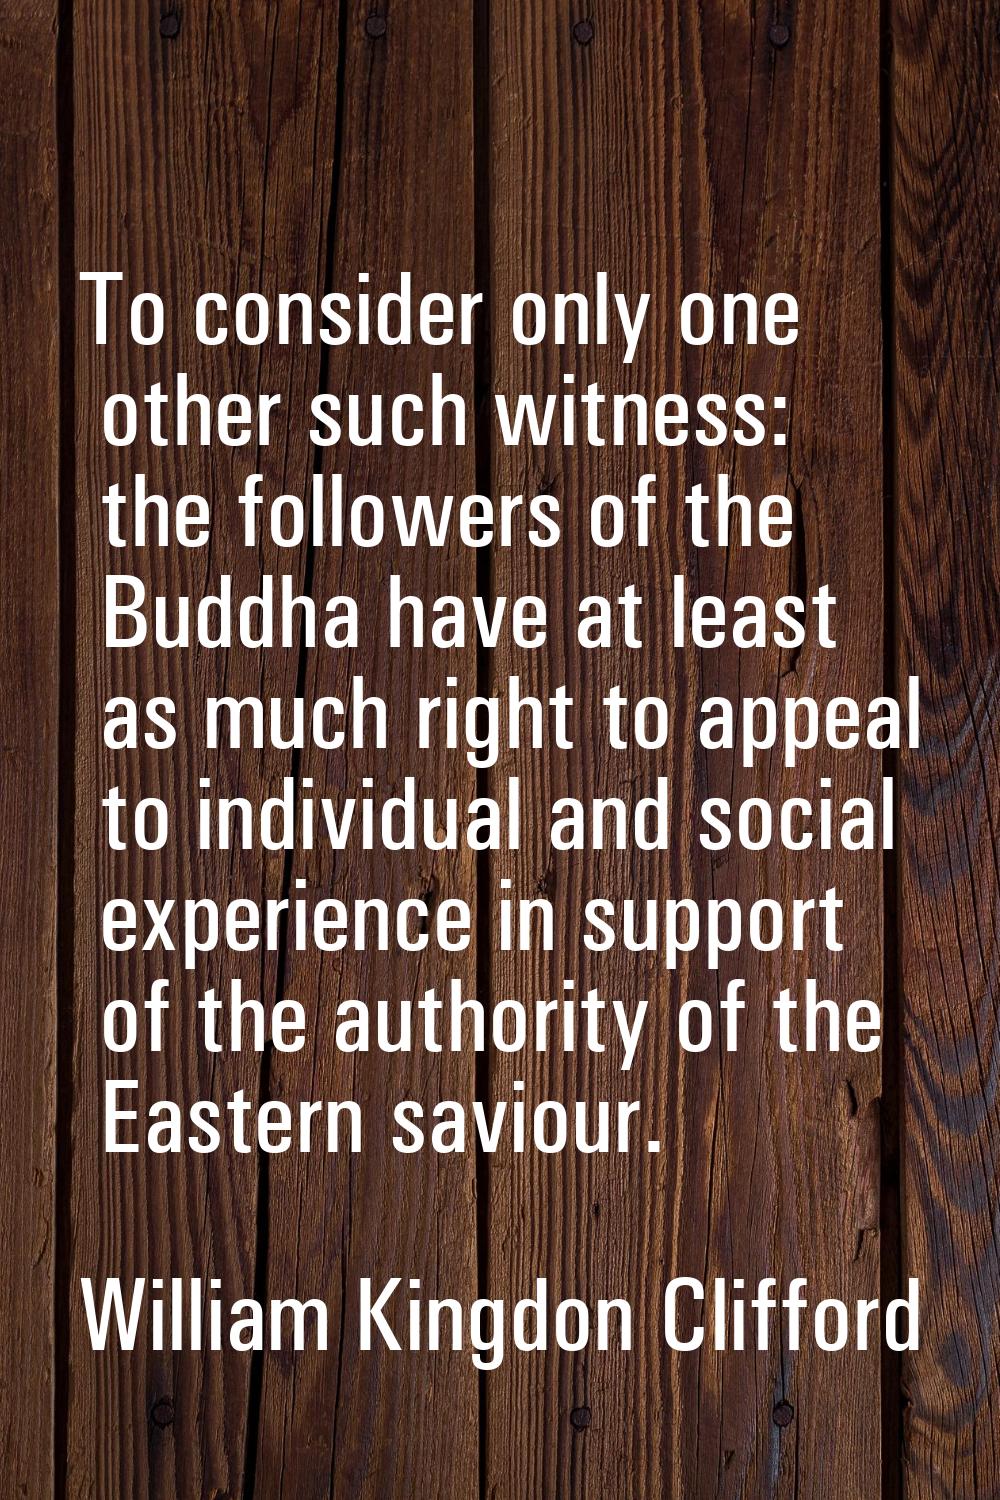 To consider only one other such witness: the followers of the Buddha have at least as much right to